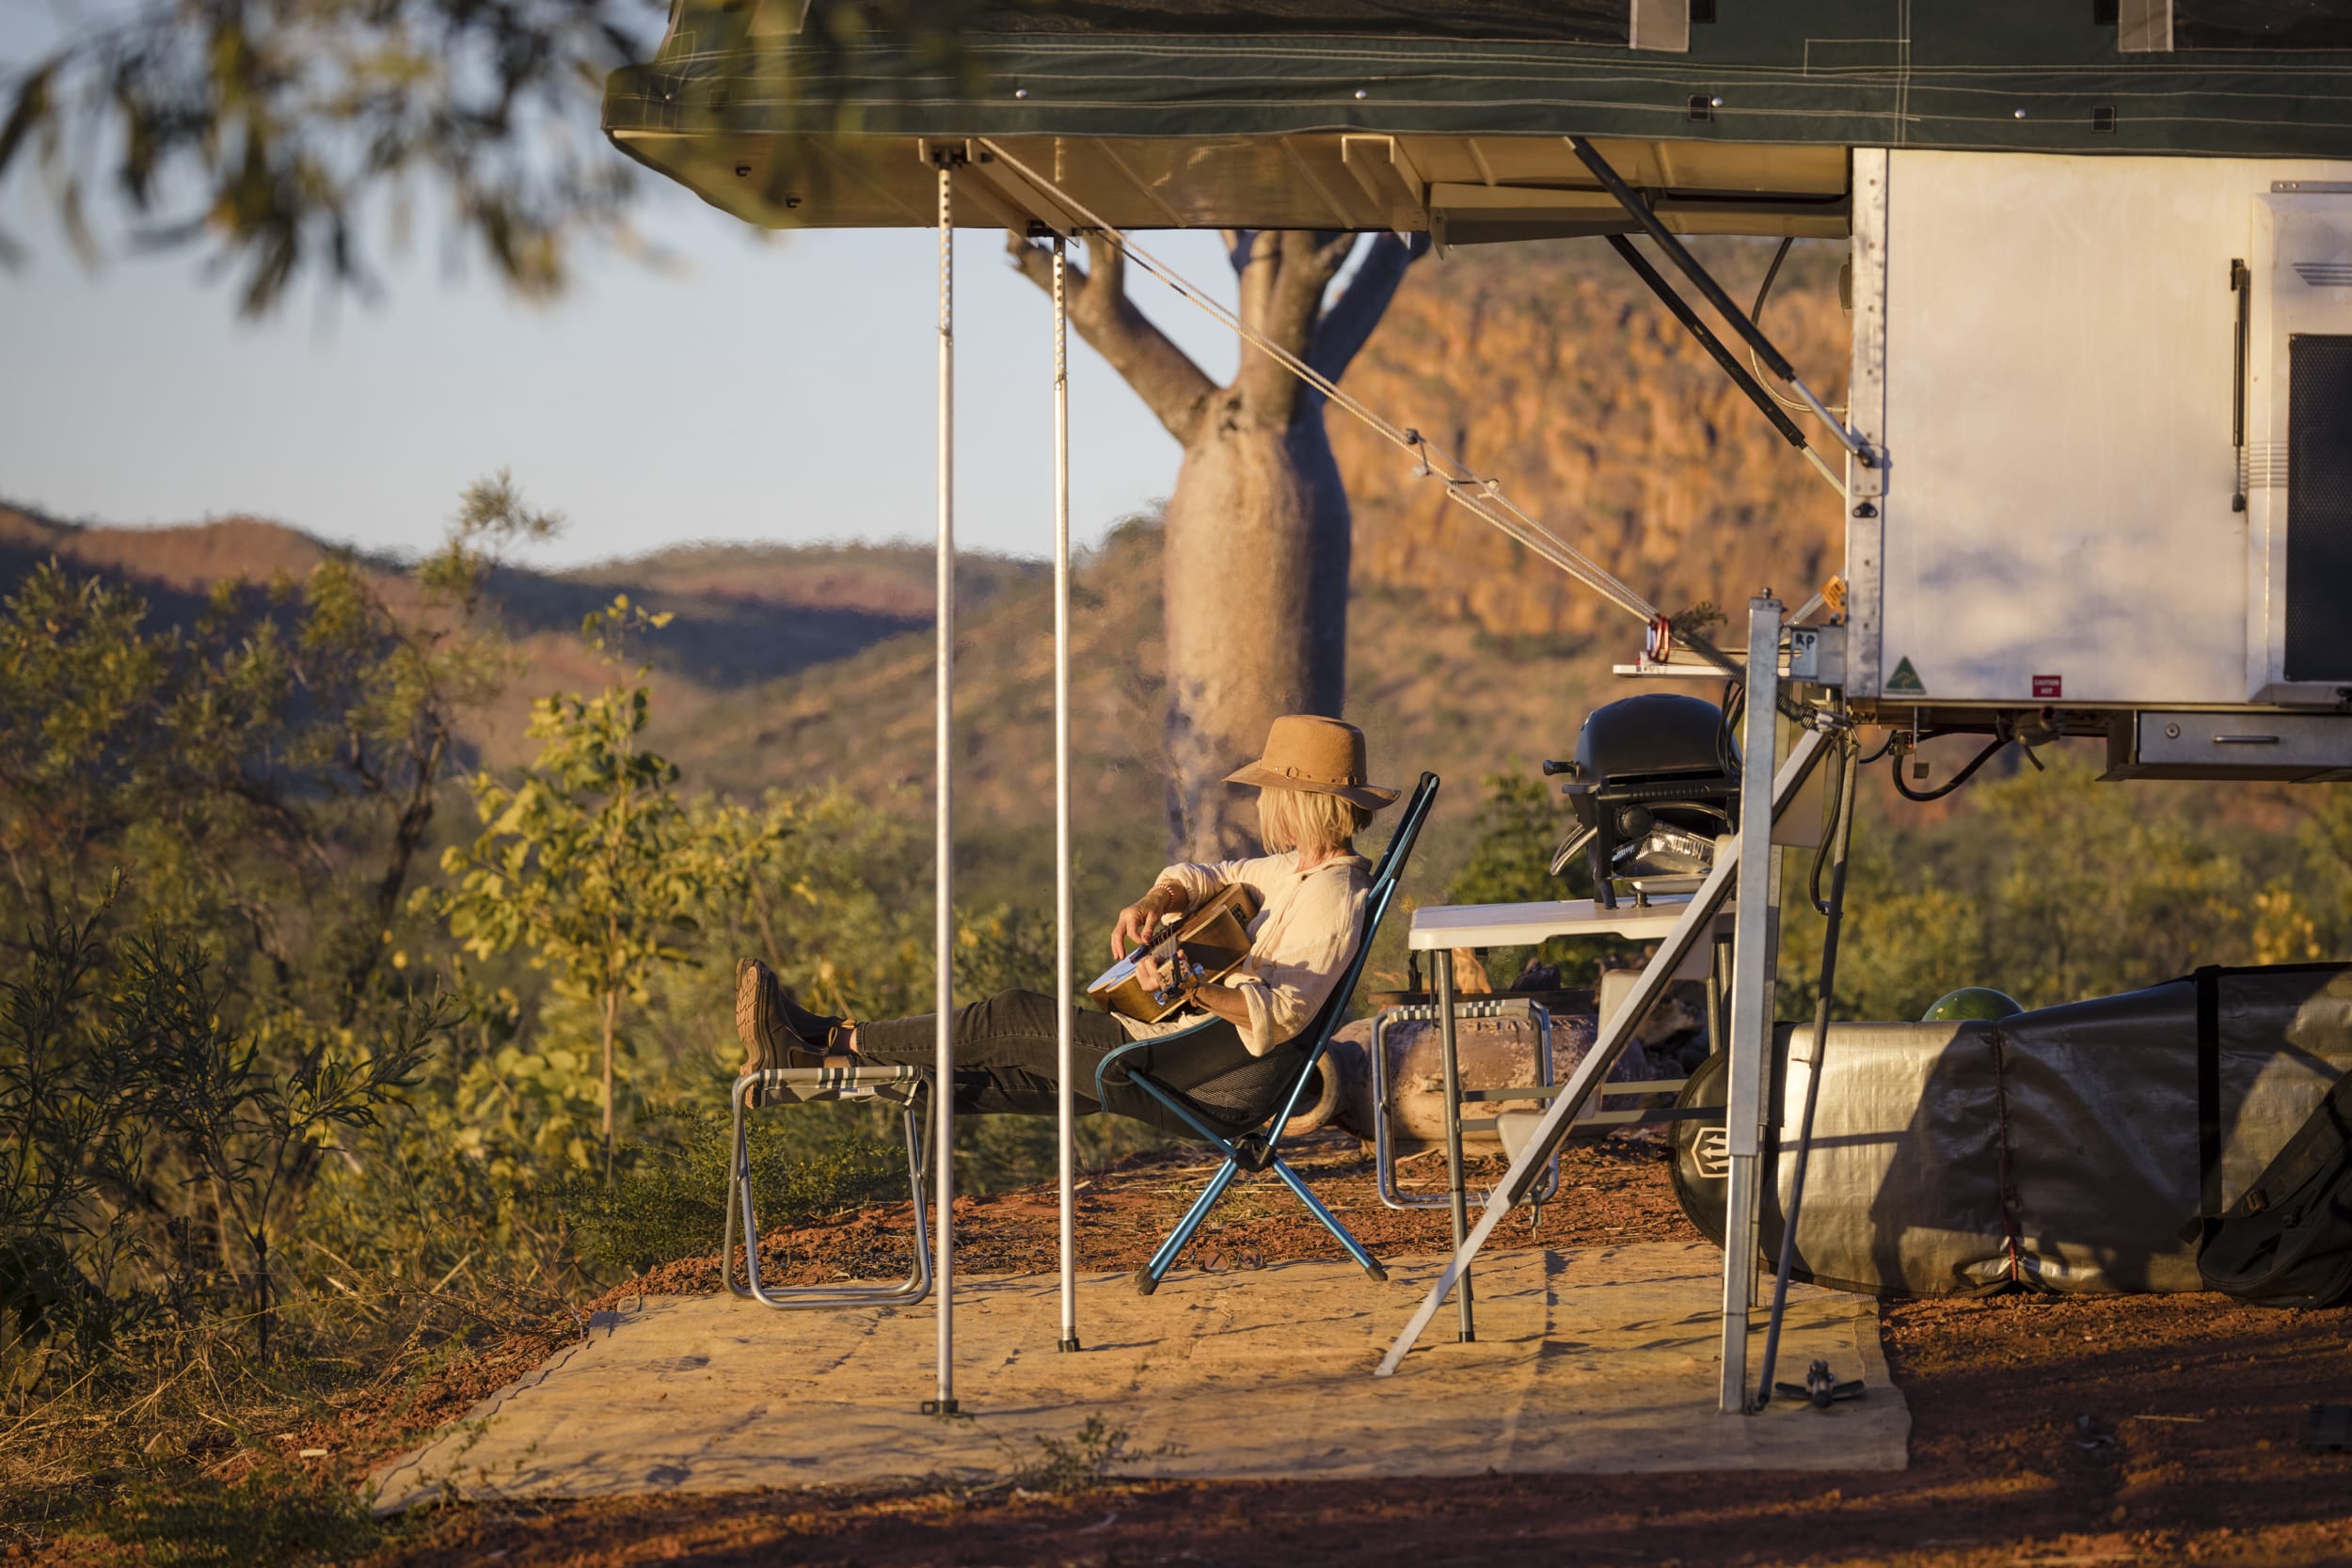 This was the most private campsite we found after seven weeks of travelling